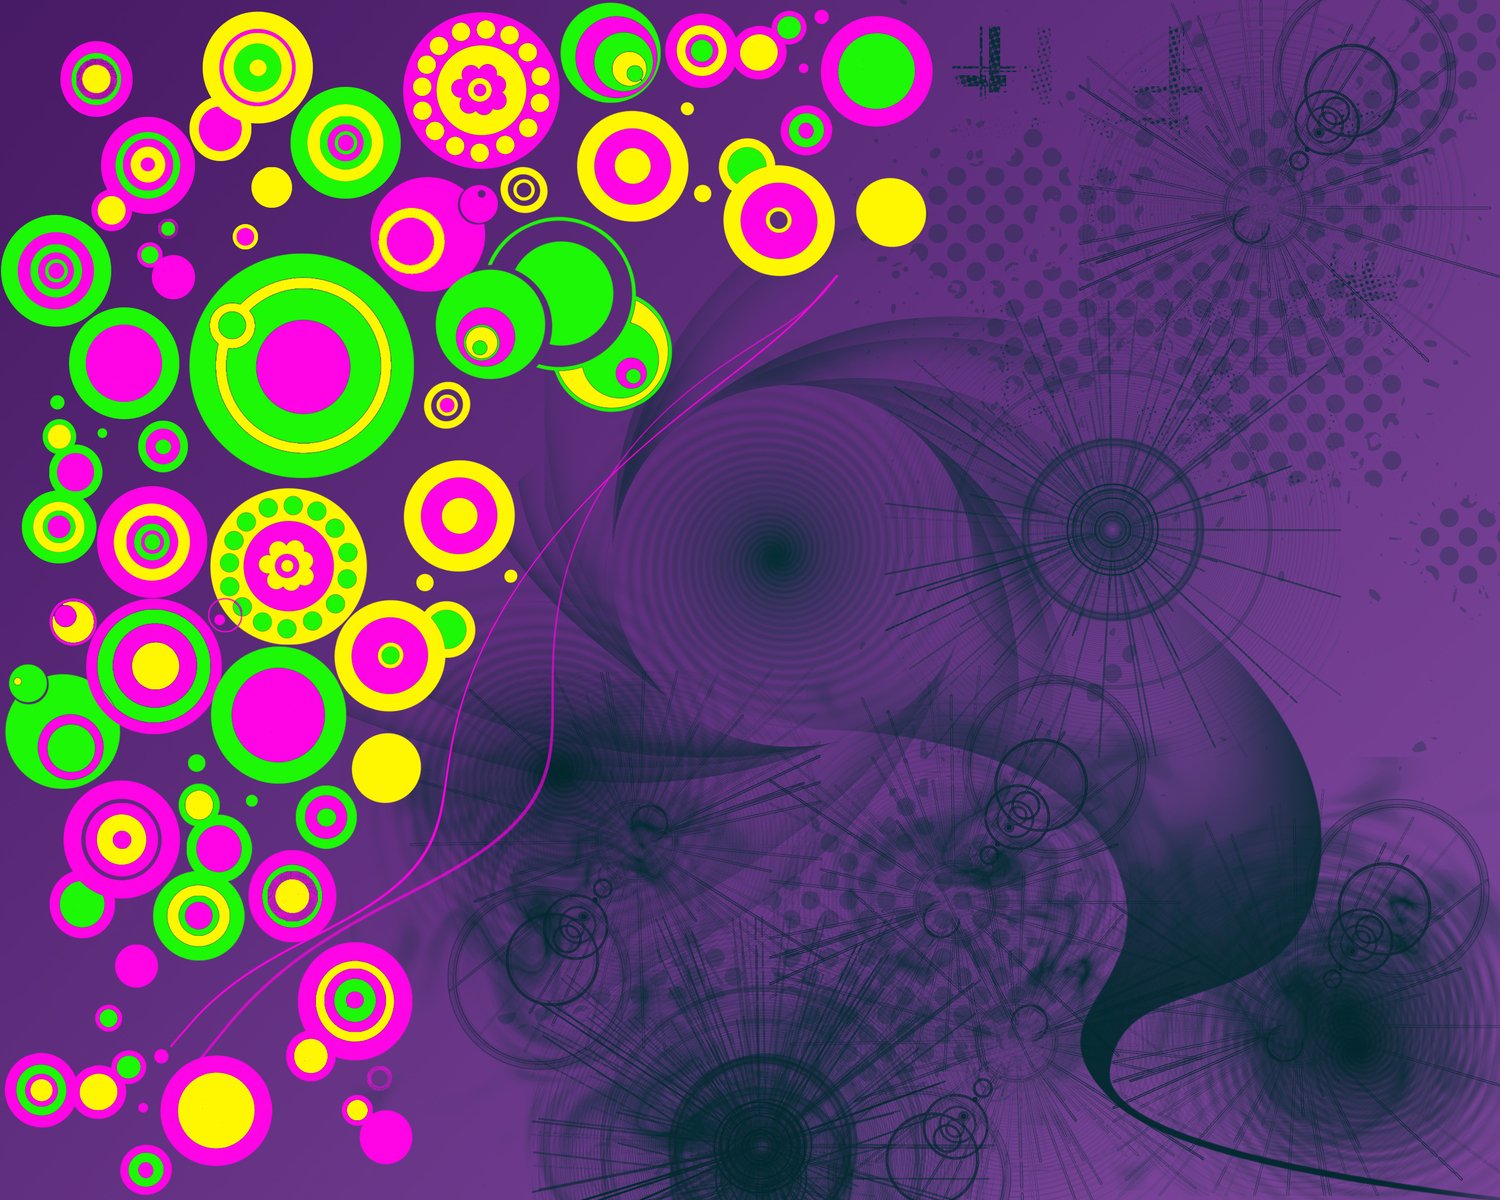 an abstract purple picture with colorful circles and shapes